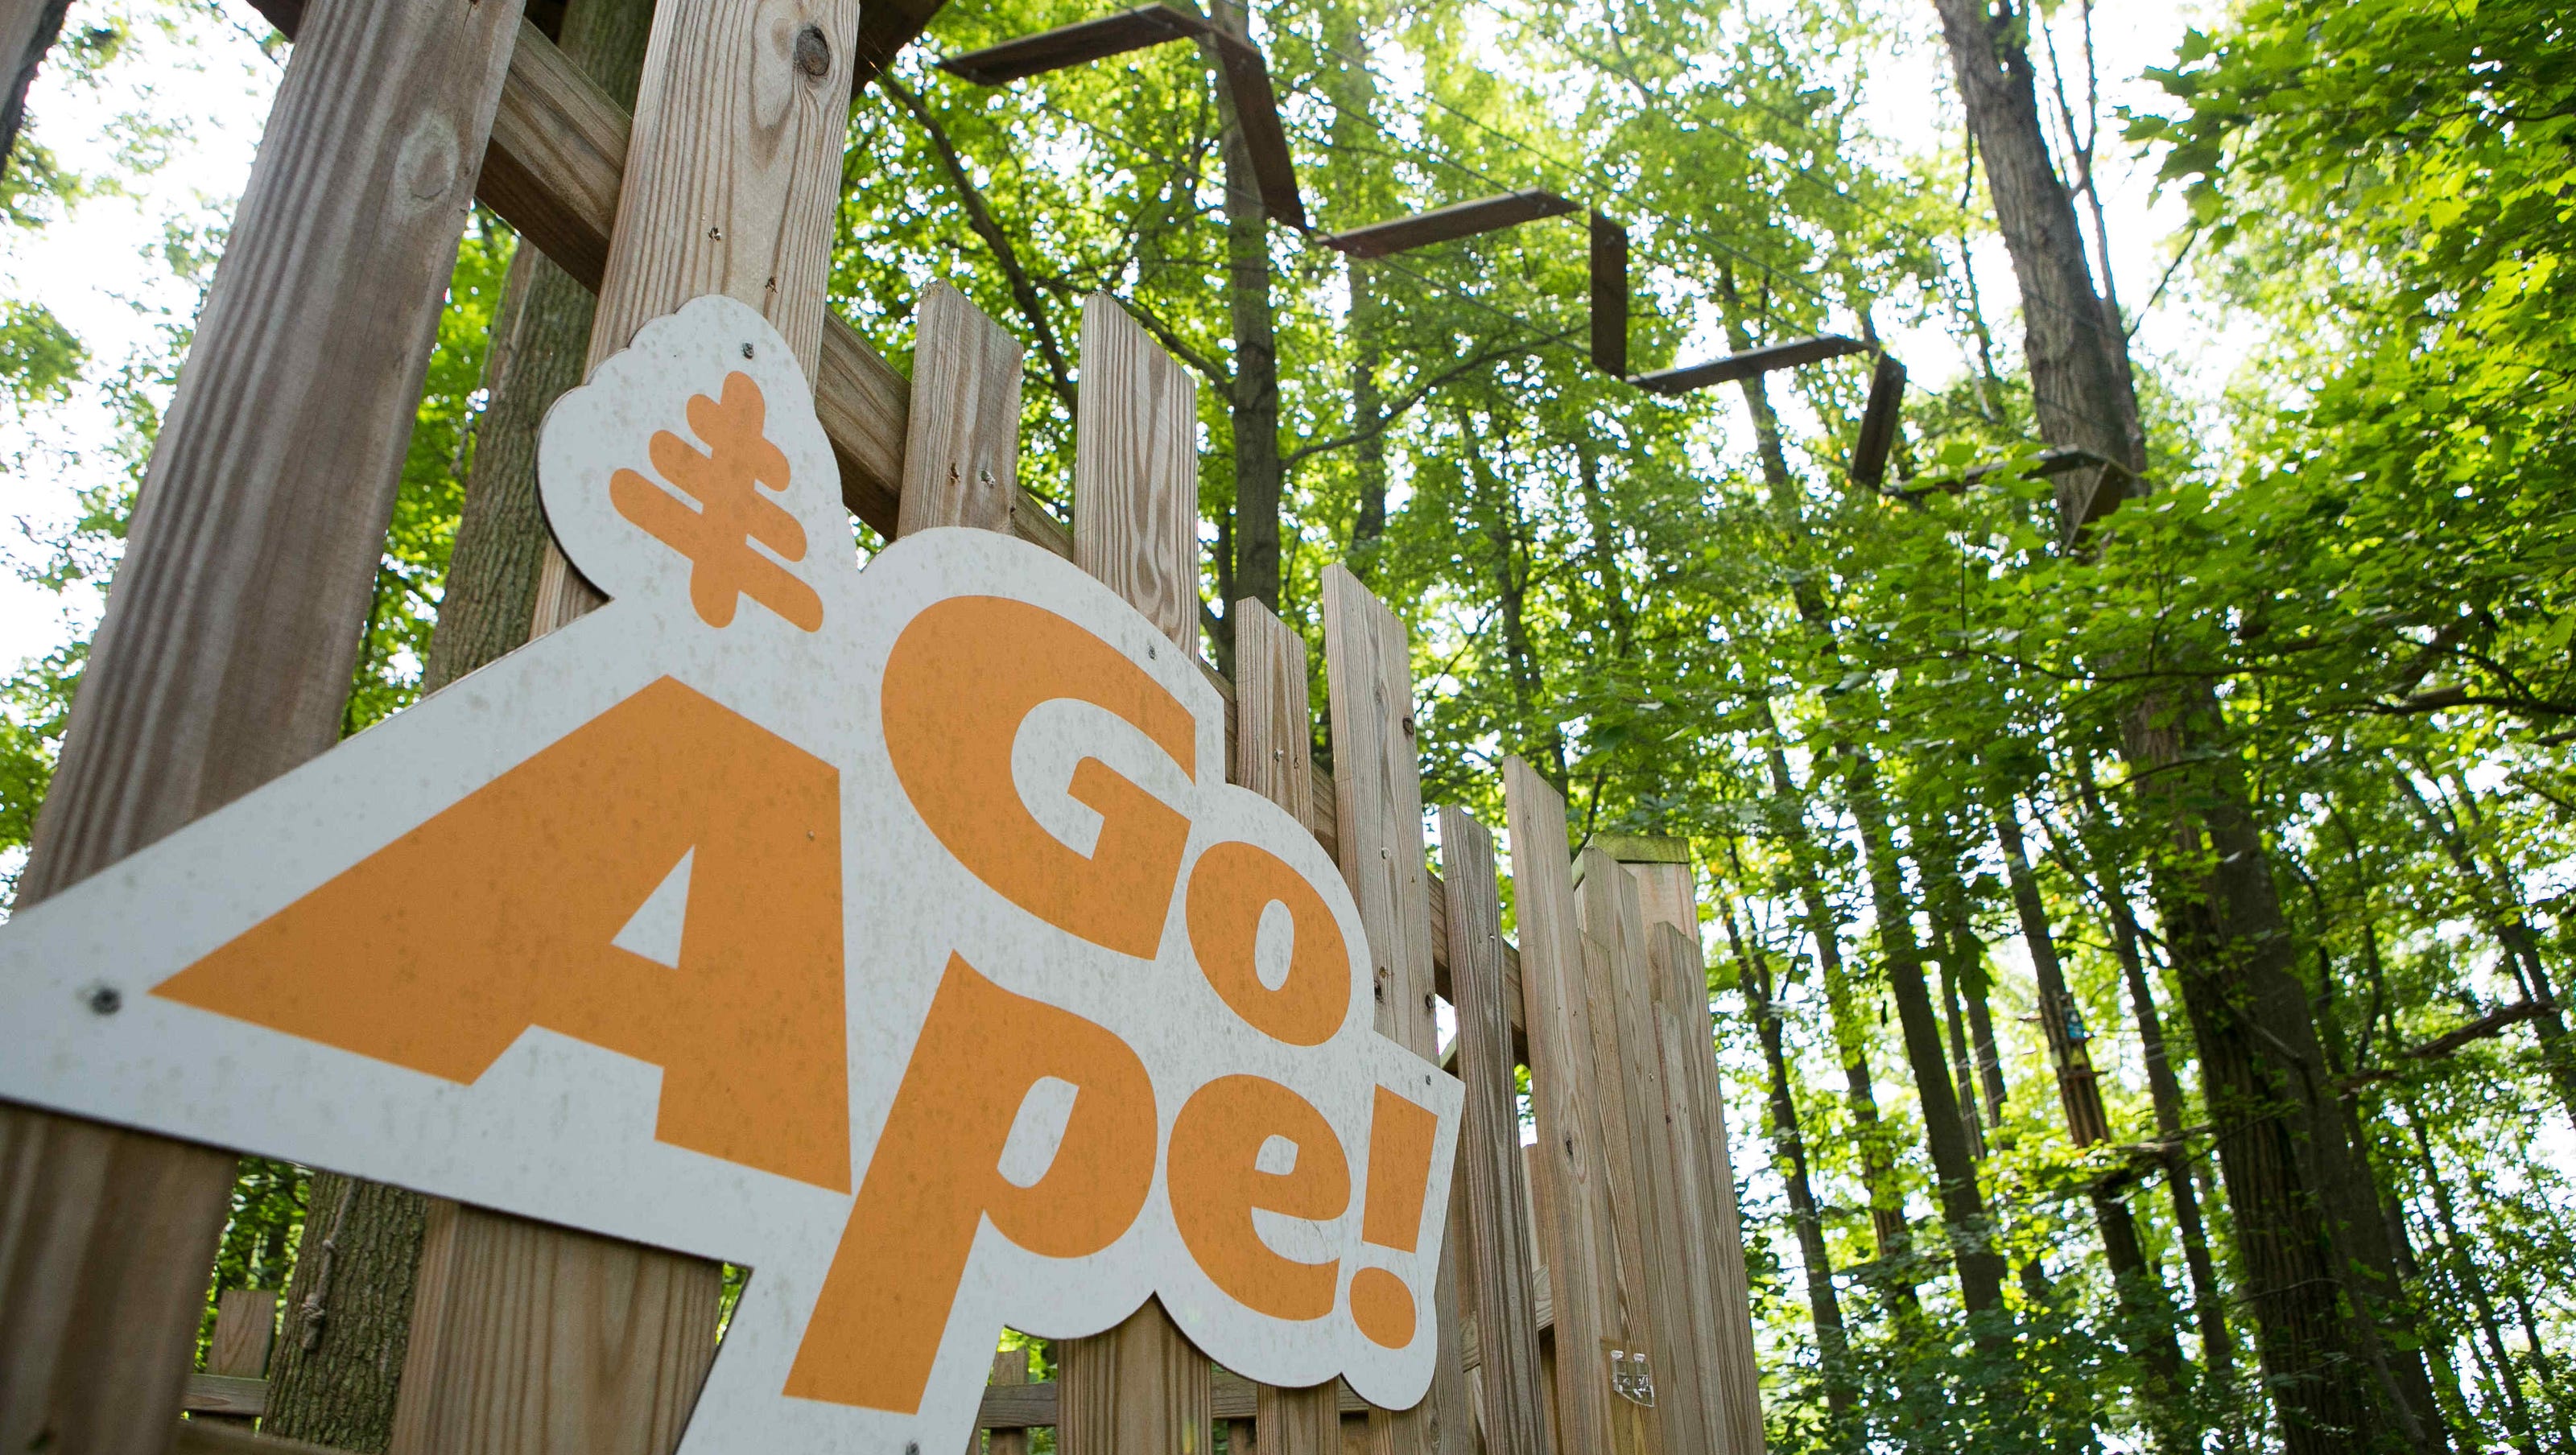 Woman Who Died After Fall From Delaware S Go Ape Zip Line Platform Id D